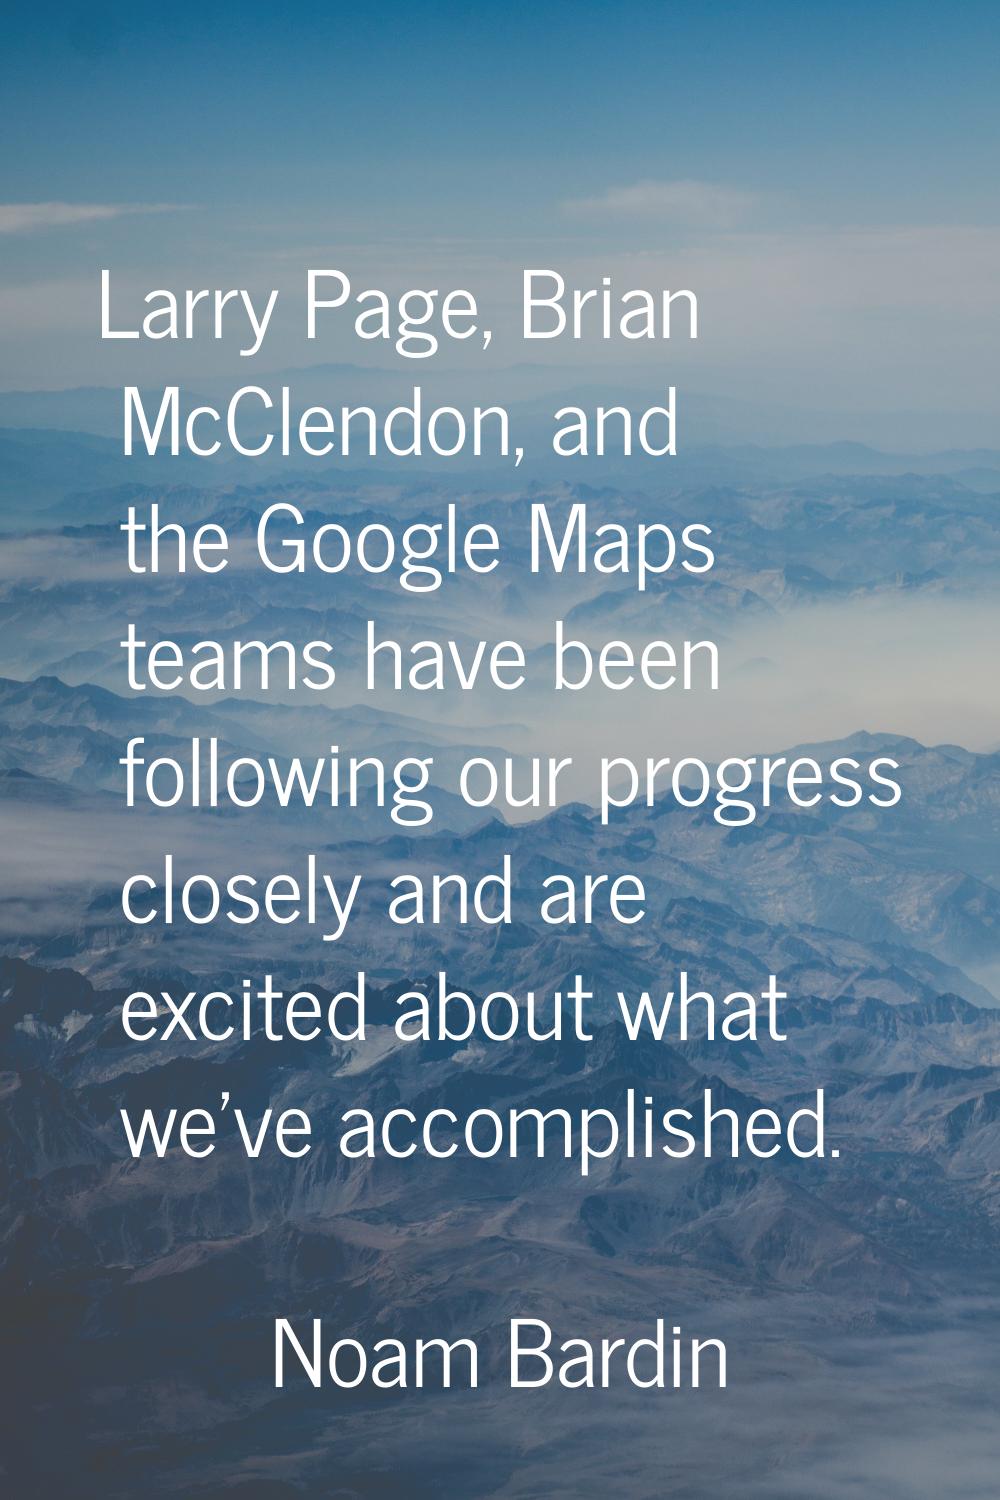 Larry Page, Brian McClendon, and the Google Maps teams have been following our progress closely and